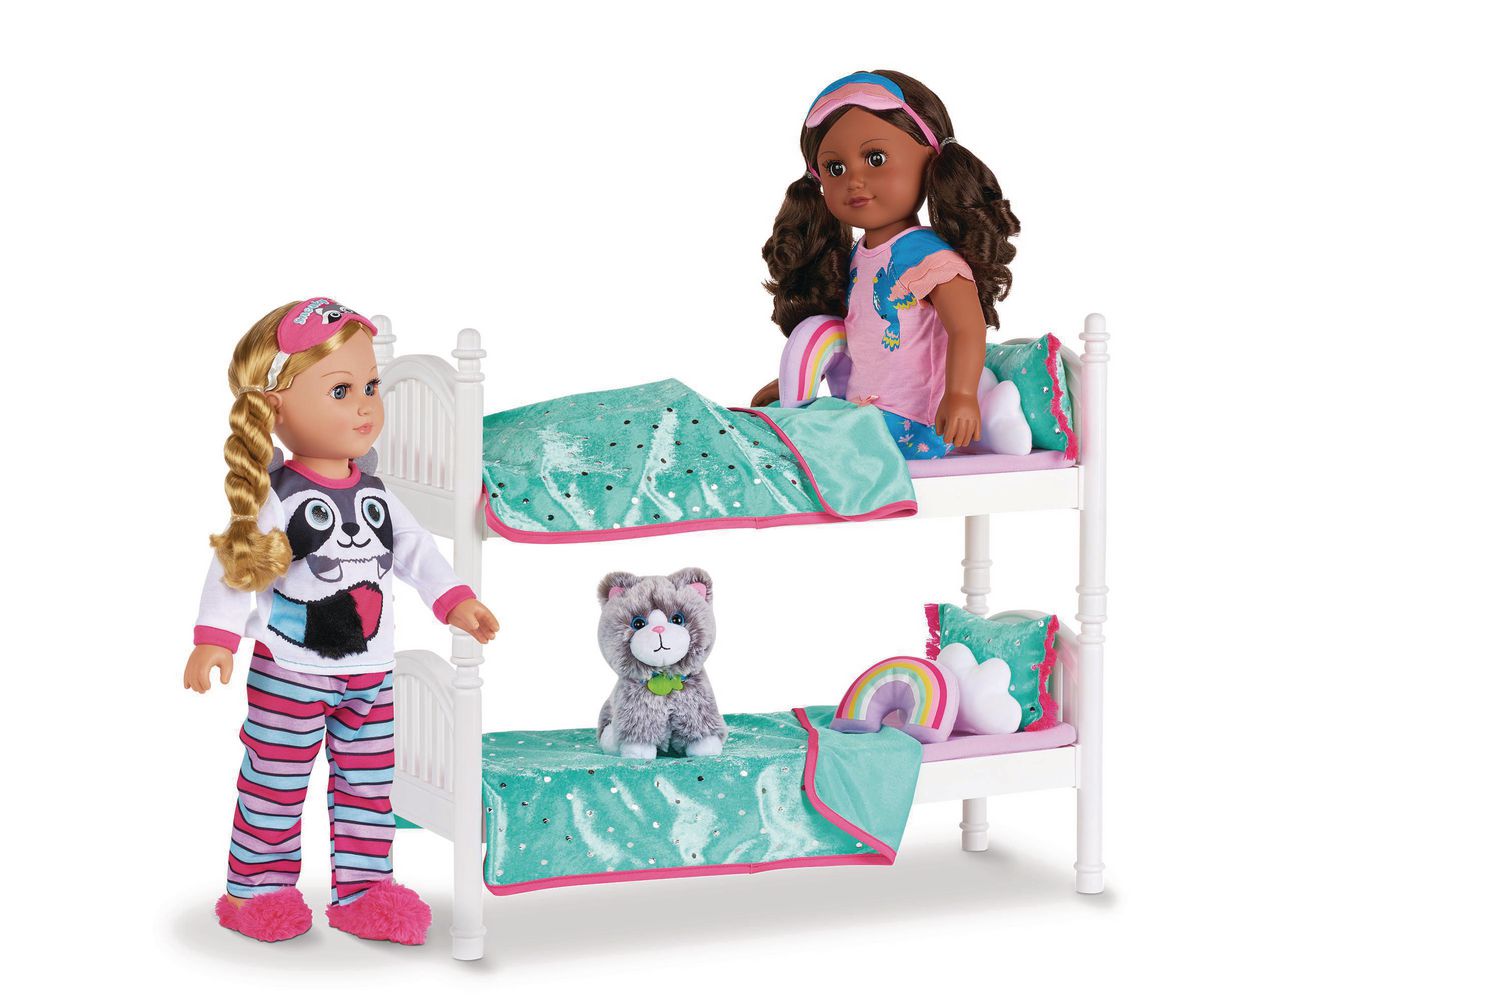 Doll Furniture Bed Toy w/Accessories For Kids, 18-in, Ages 5+